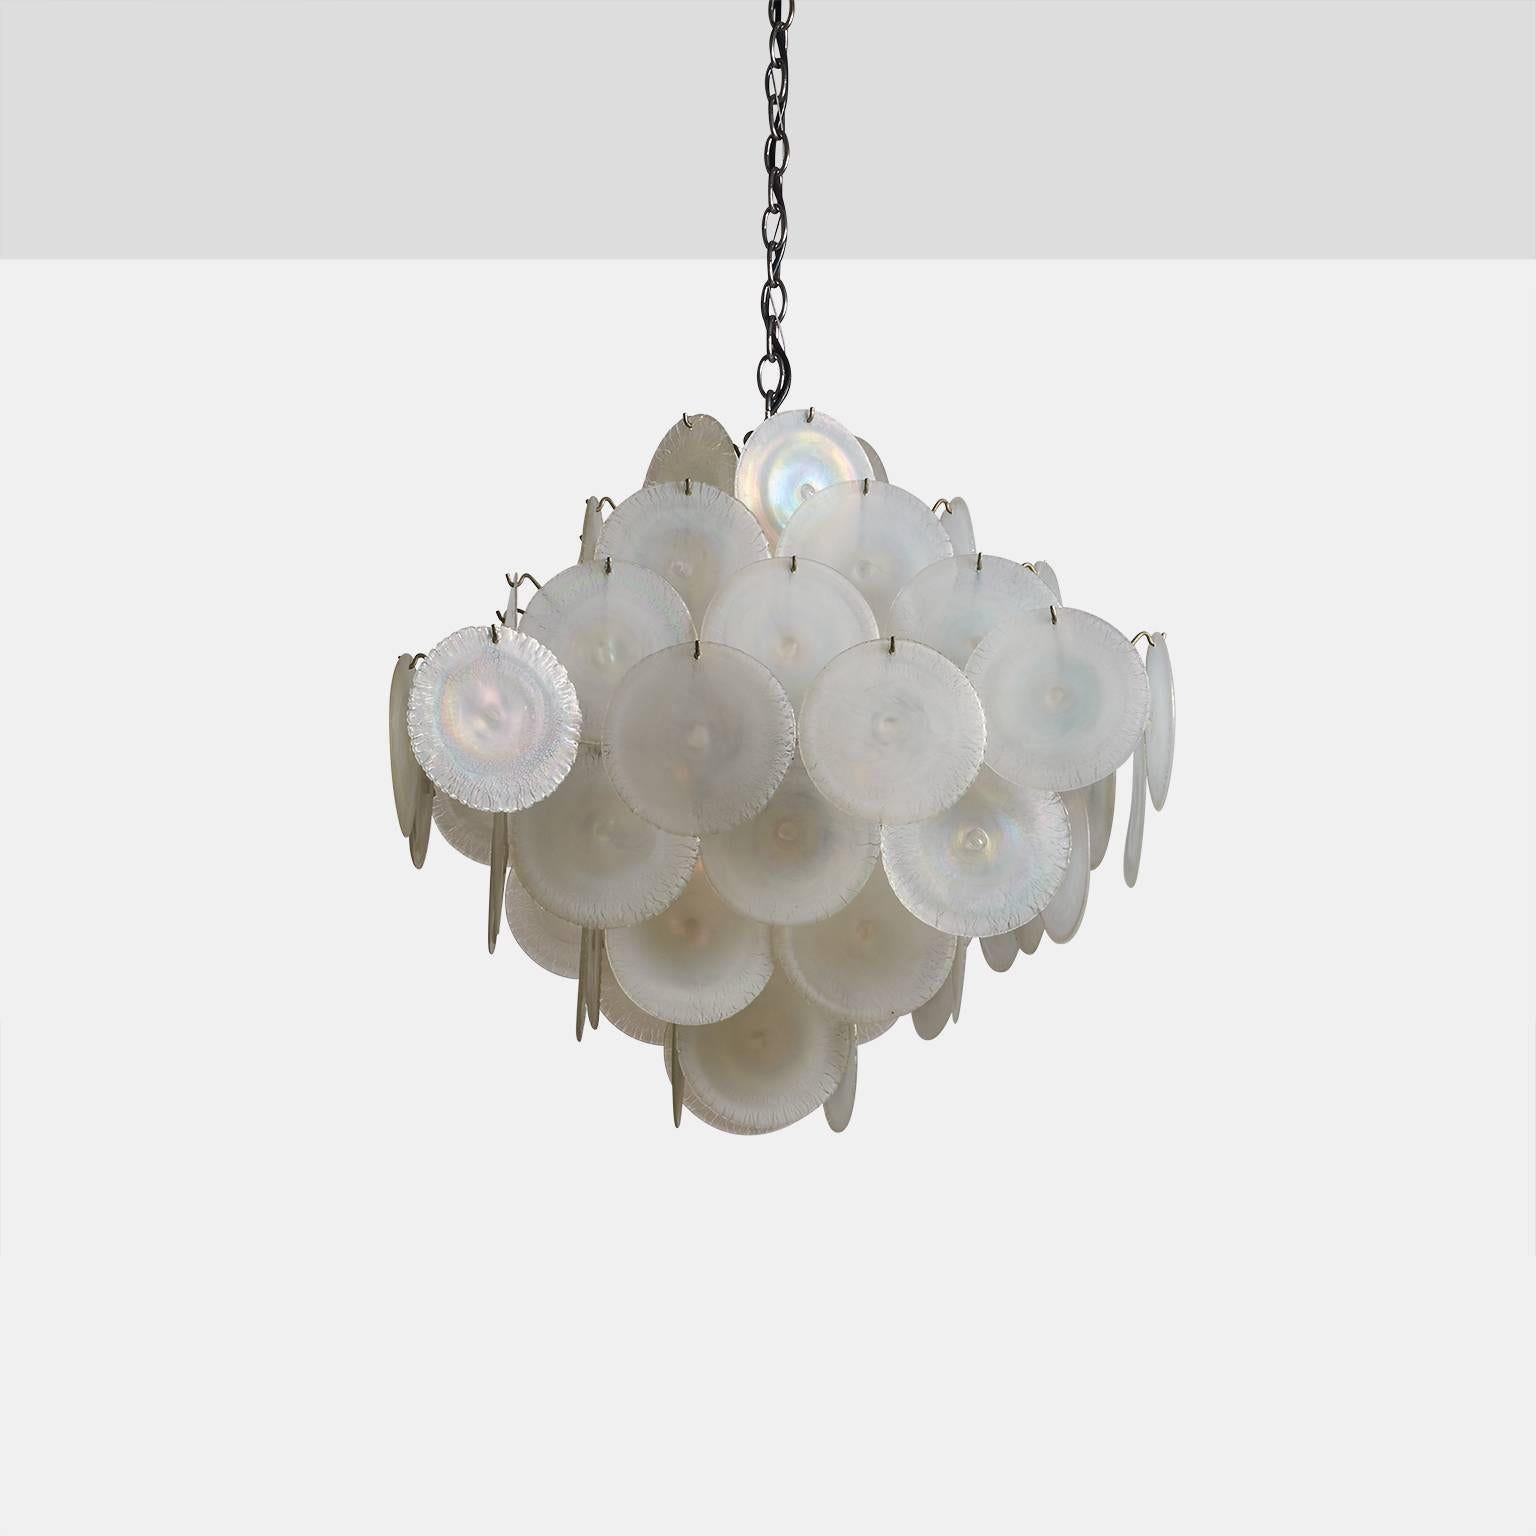 A large Vistosi chandelier made in Italy in the 1960s. The chandelier contains 68 Murano iridescent glass discs that conceal 12 European size candelabra base sockets.